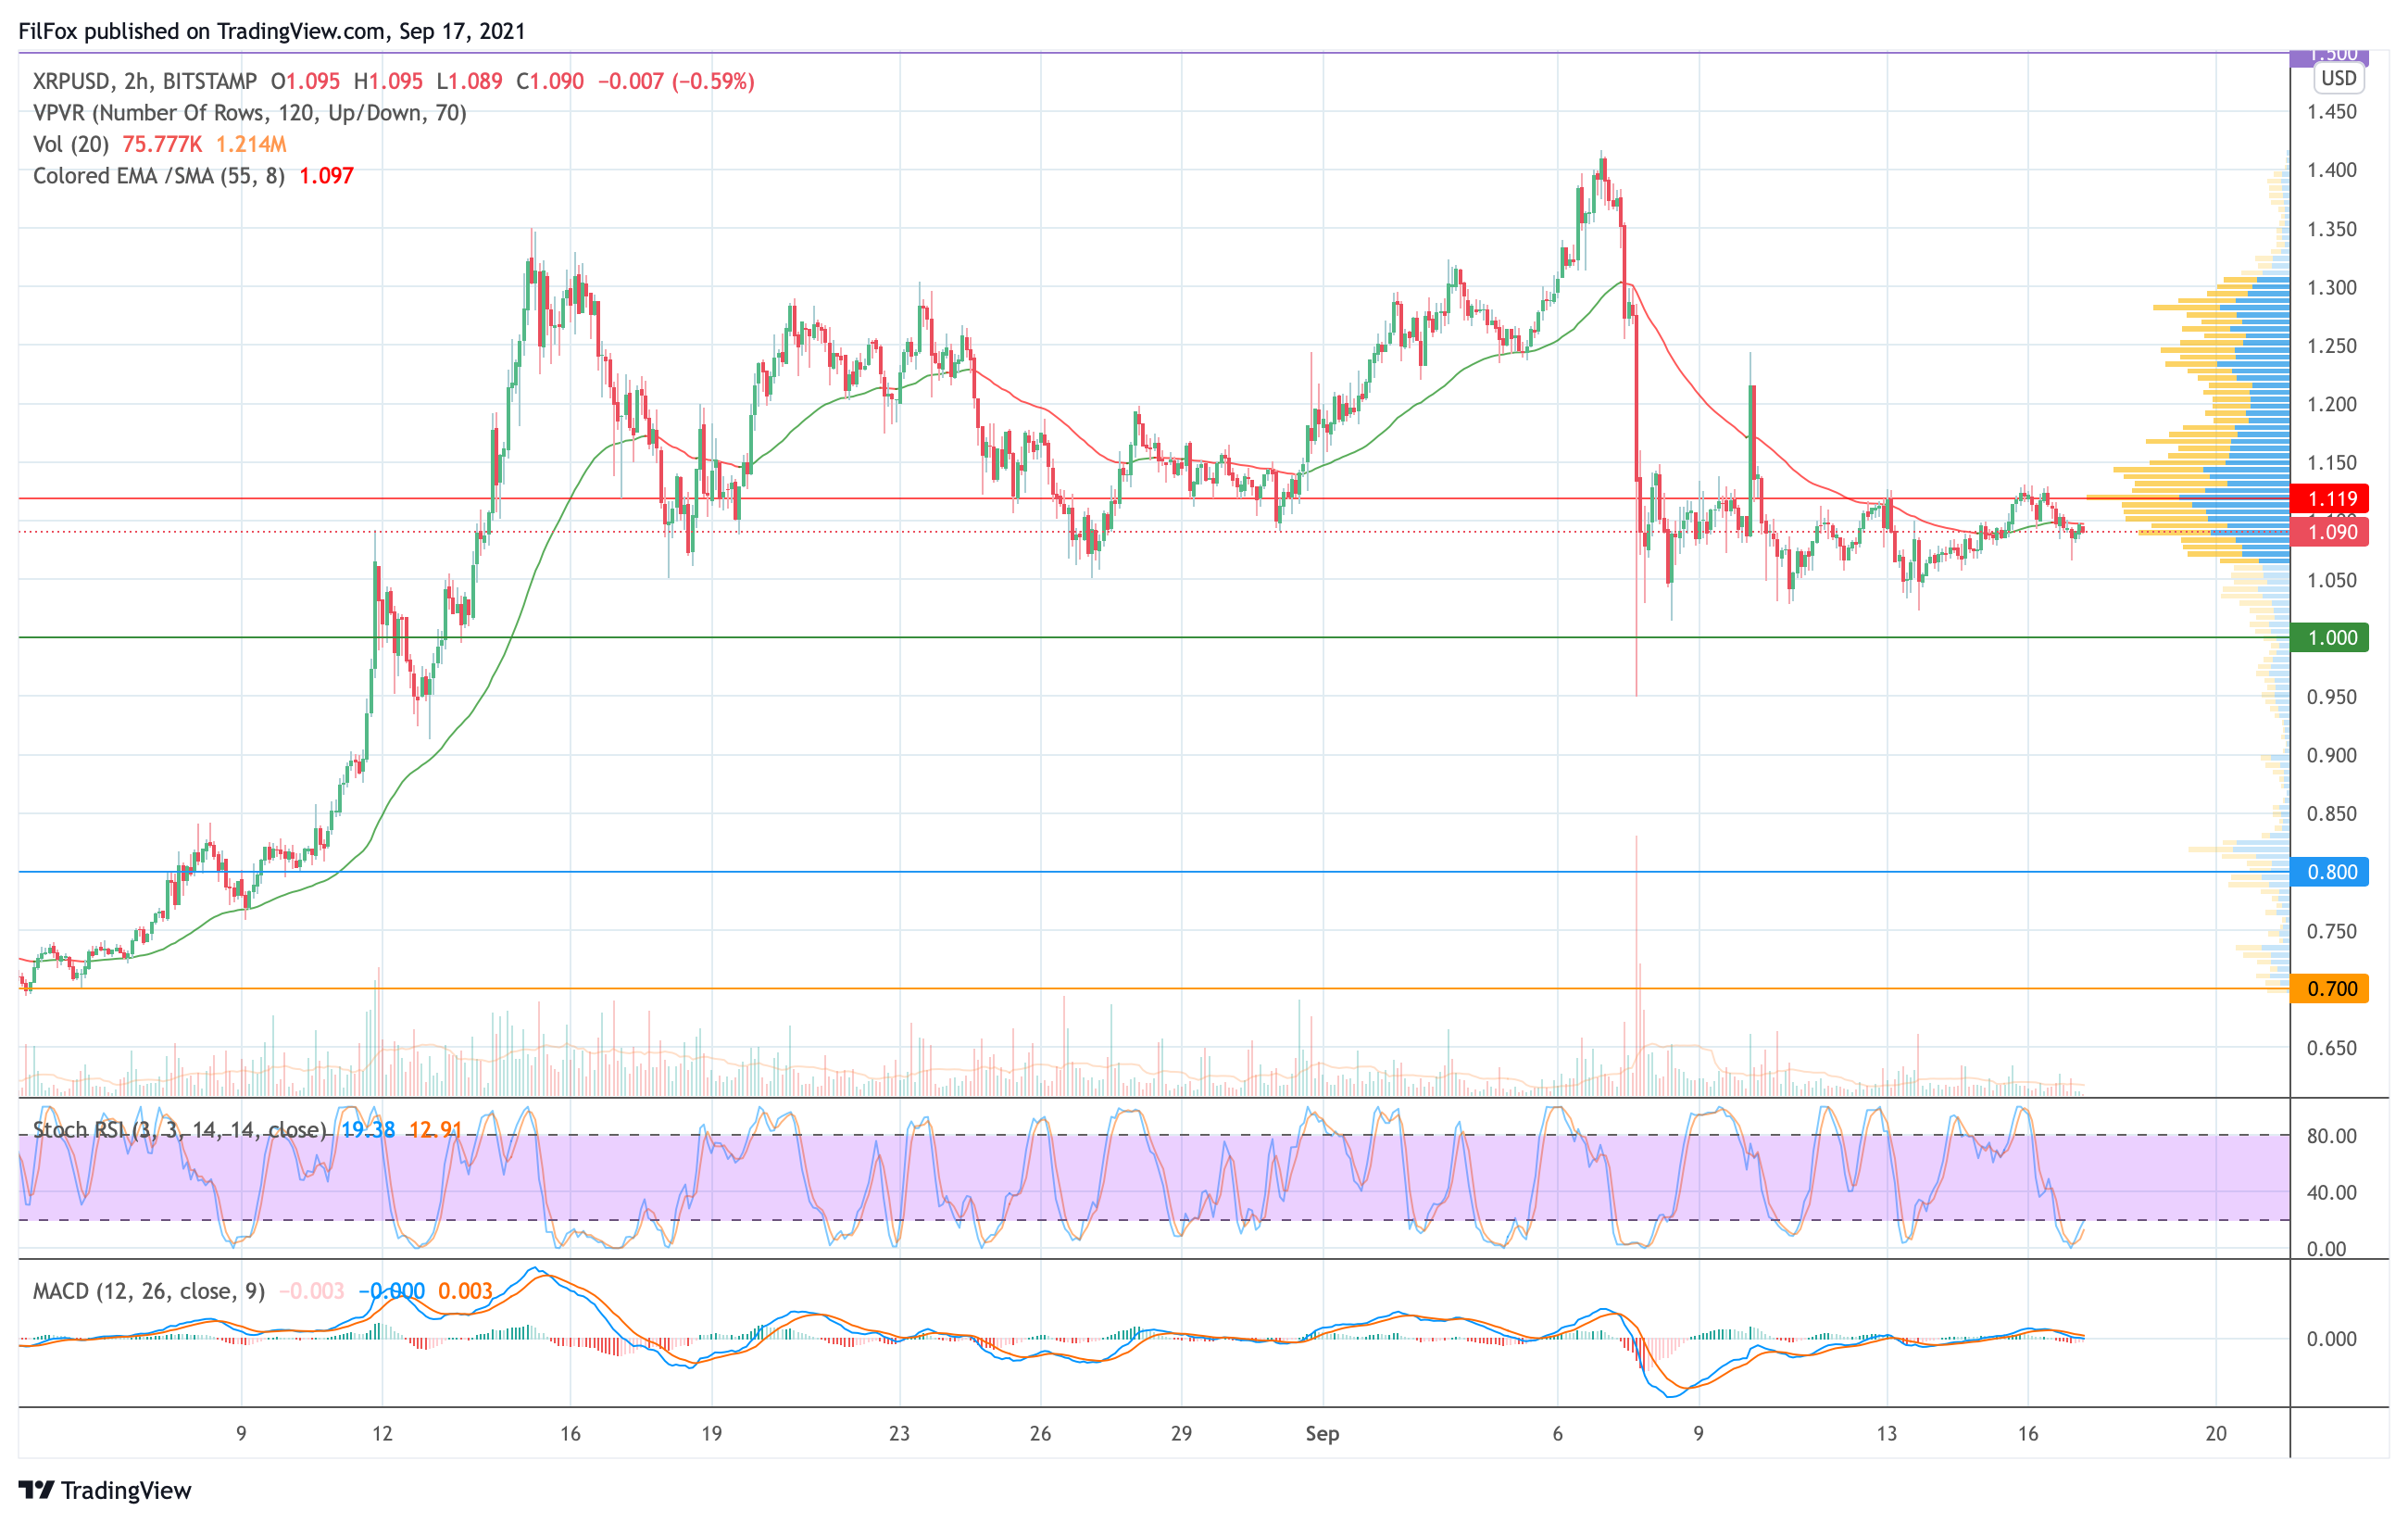 Analysis of the prices of Bitcoin, Ethereum, XRP for 09/17/2021